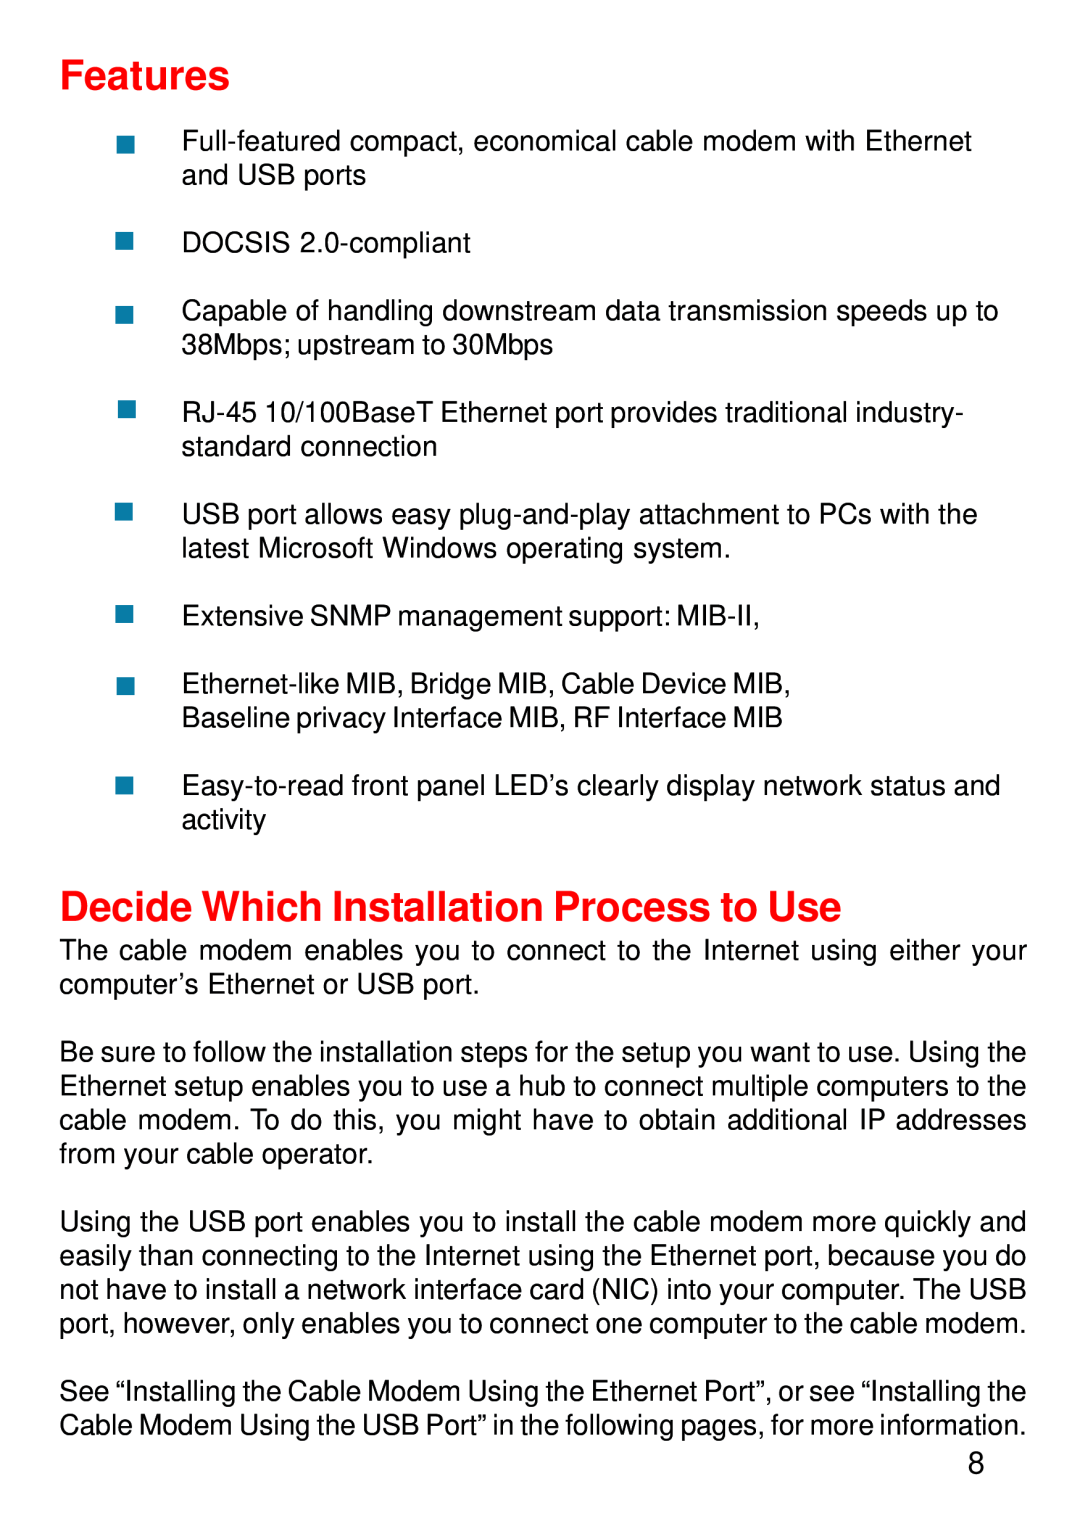 D-Link DCM-202 manual Features, Decide Which Installation Process to Use 